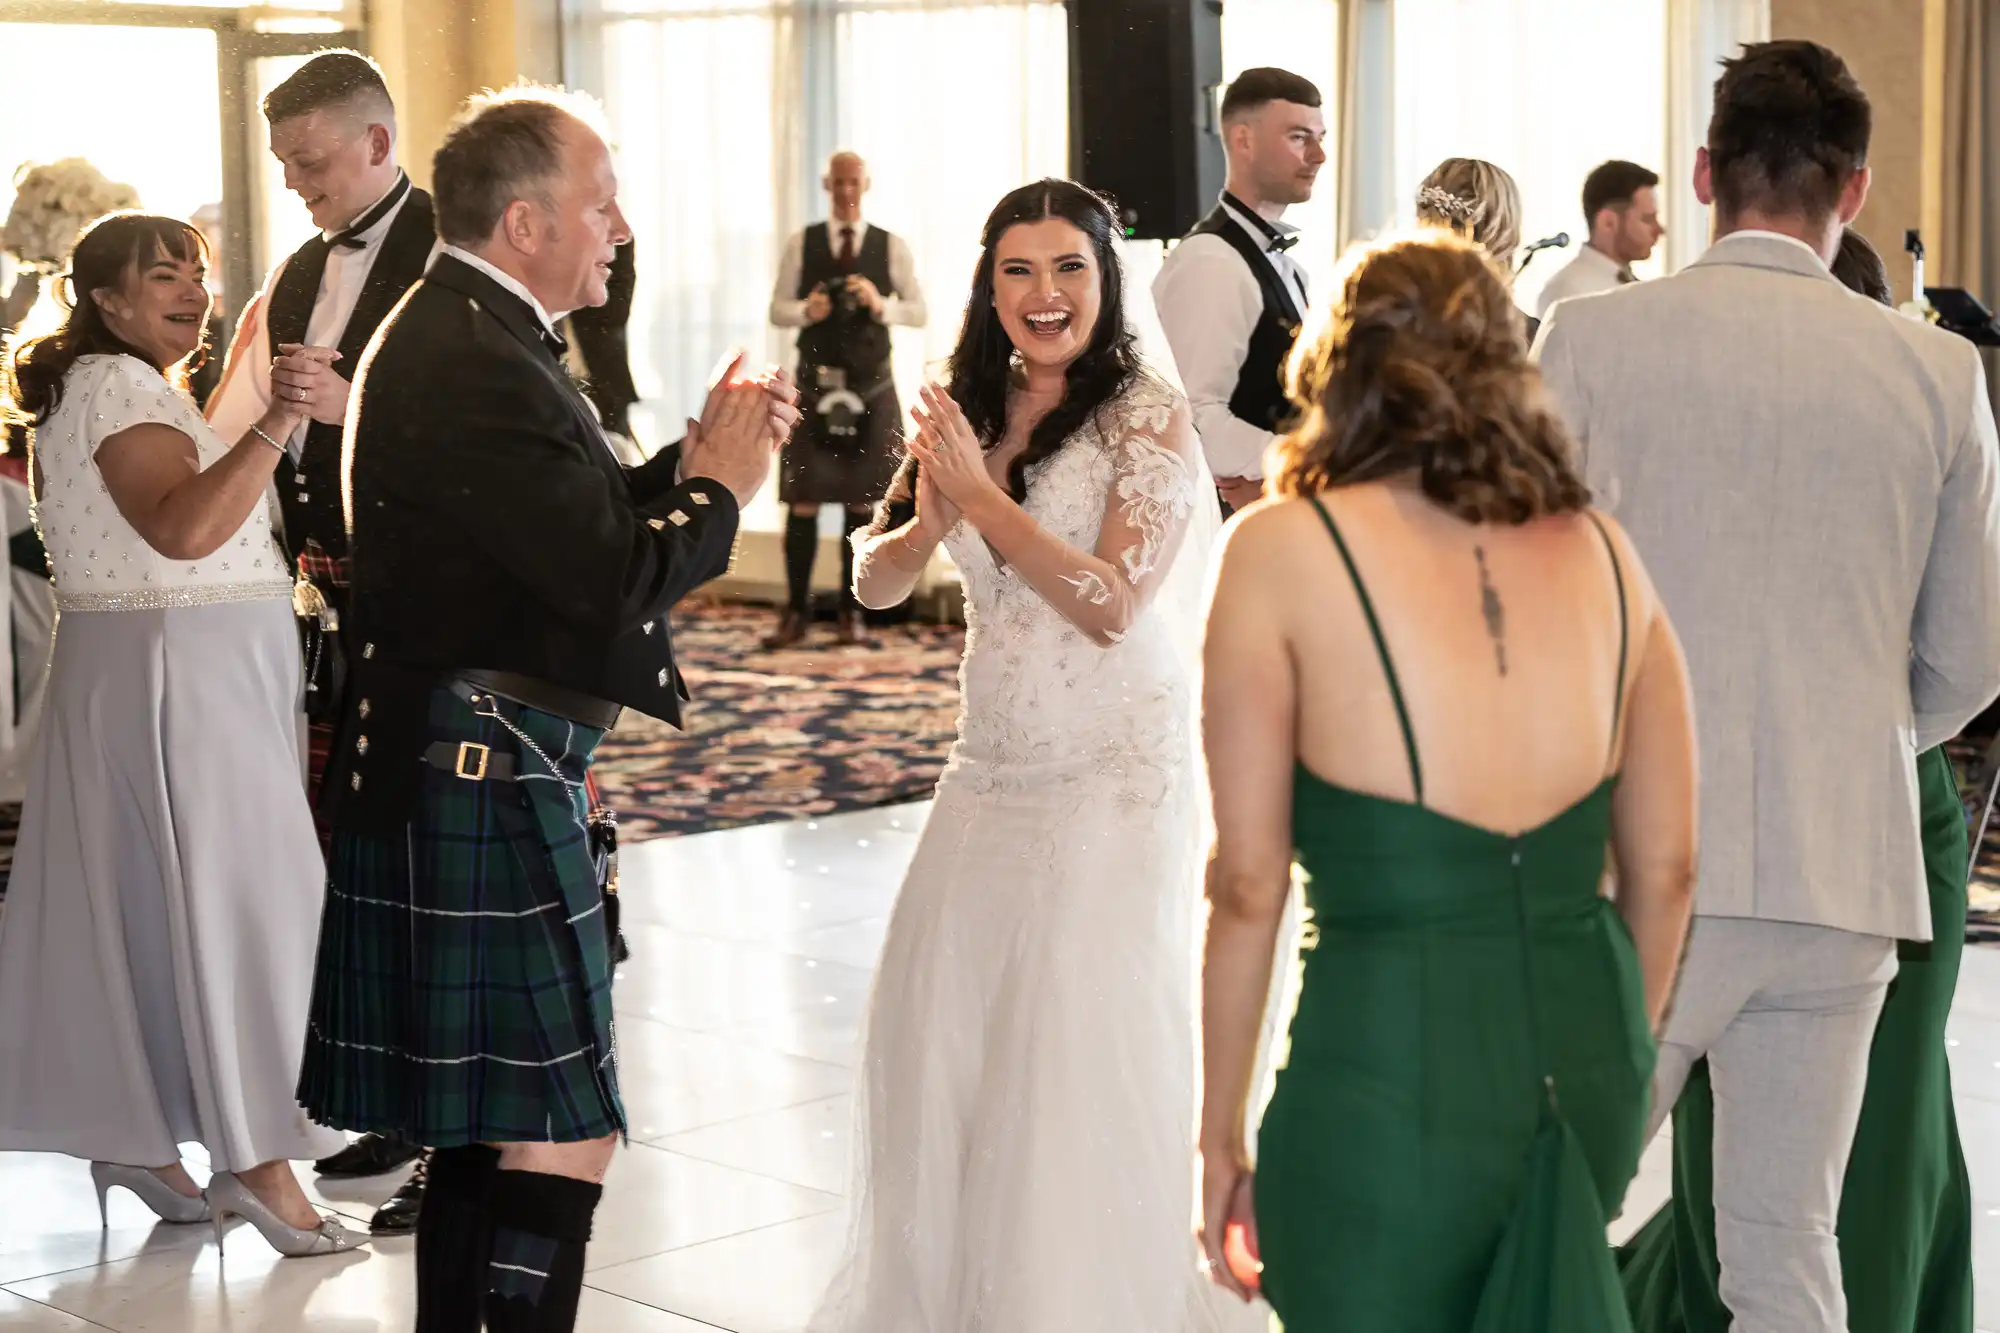 A bride in a lace dress joyfully claps hands with a man in a kilt at a lively wedding reception, surrounded by guests in formal attire.